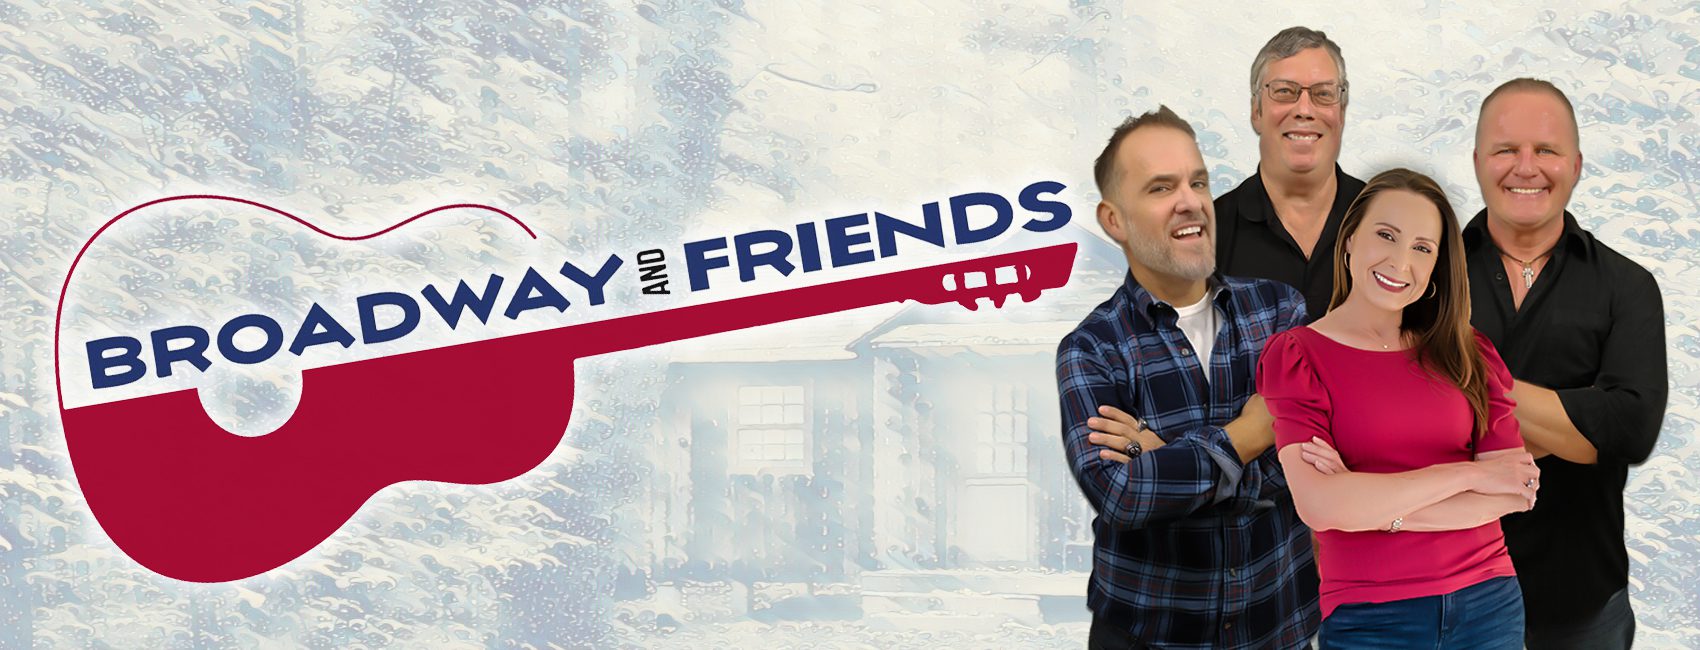 Broadway and Friends | 105.1FM The Wolf | 5am-10am Weekdays